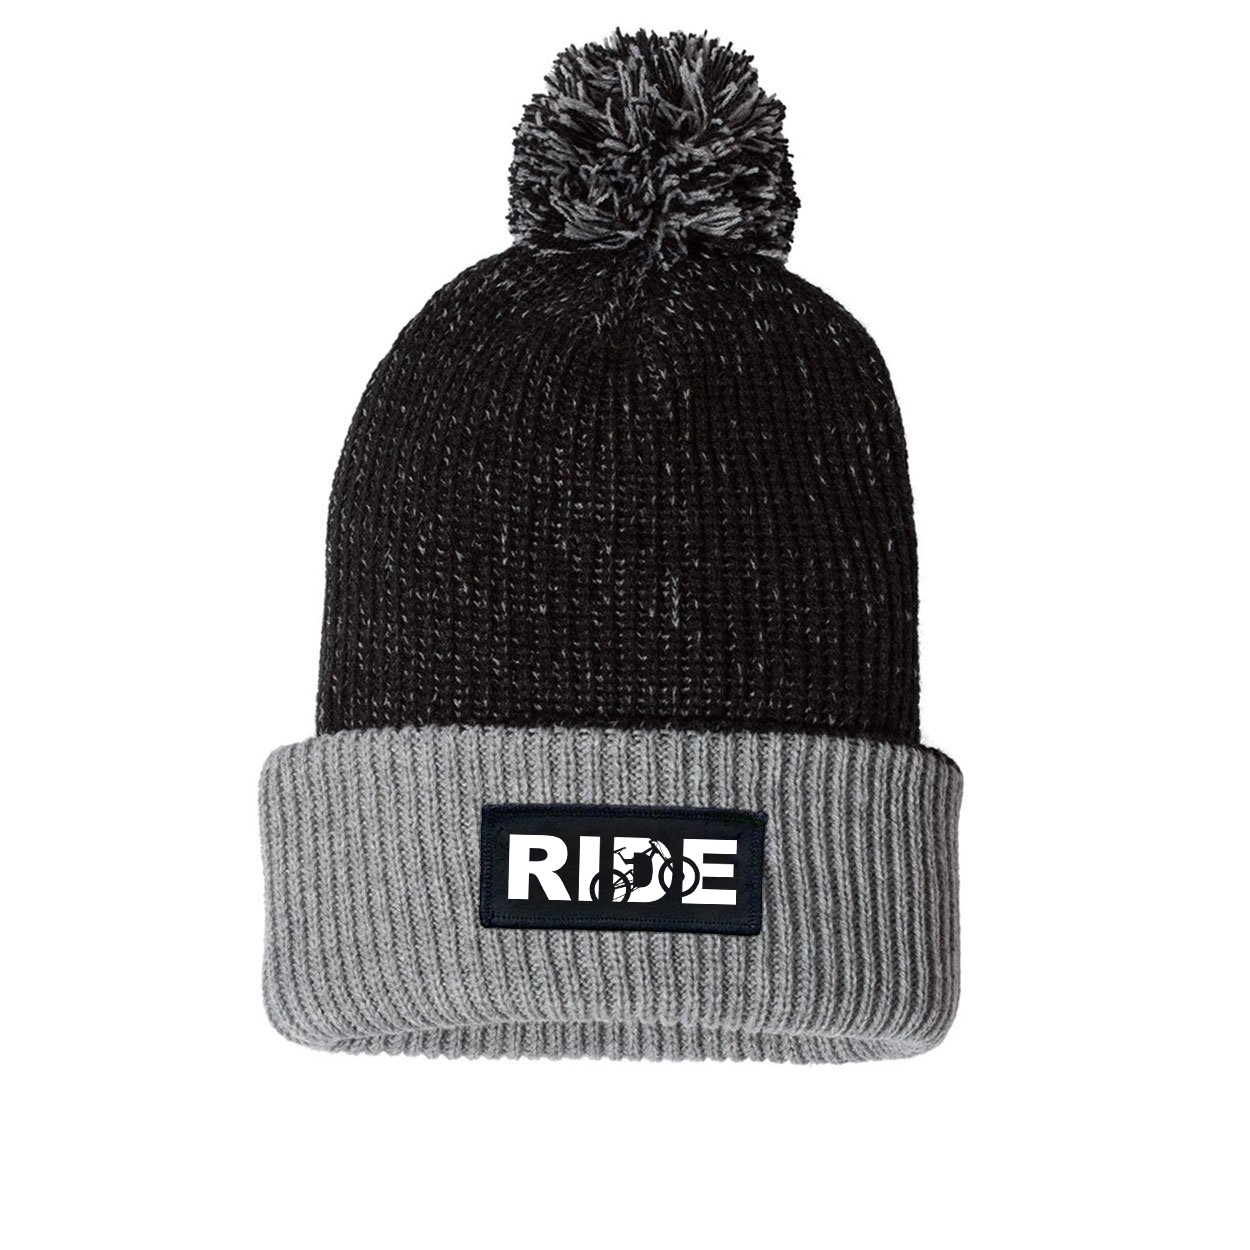 Ride MTB Logo Night Out Woven Patch Roll Up Pom Knit Beanie Black/Gray (White Logo)